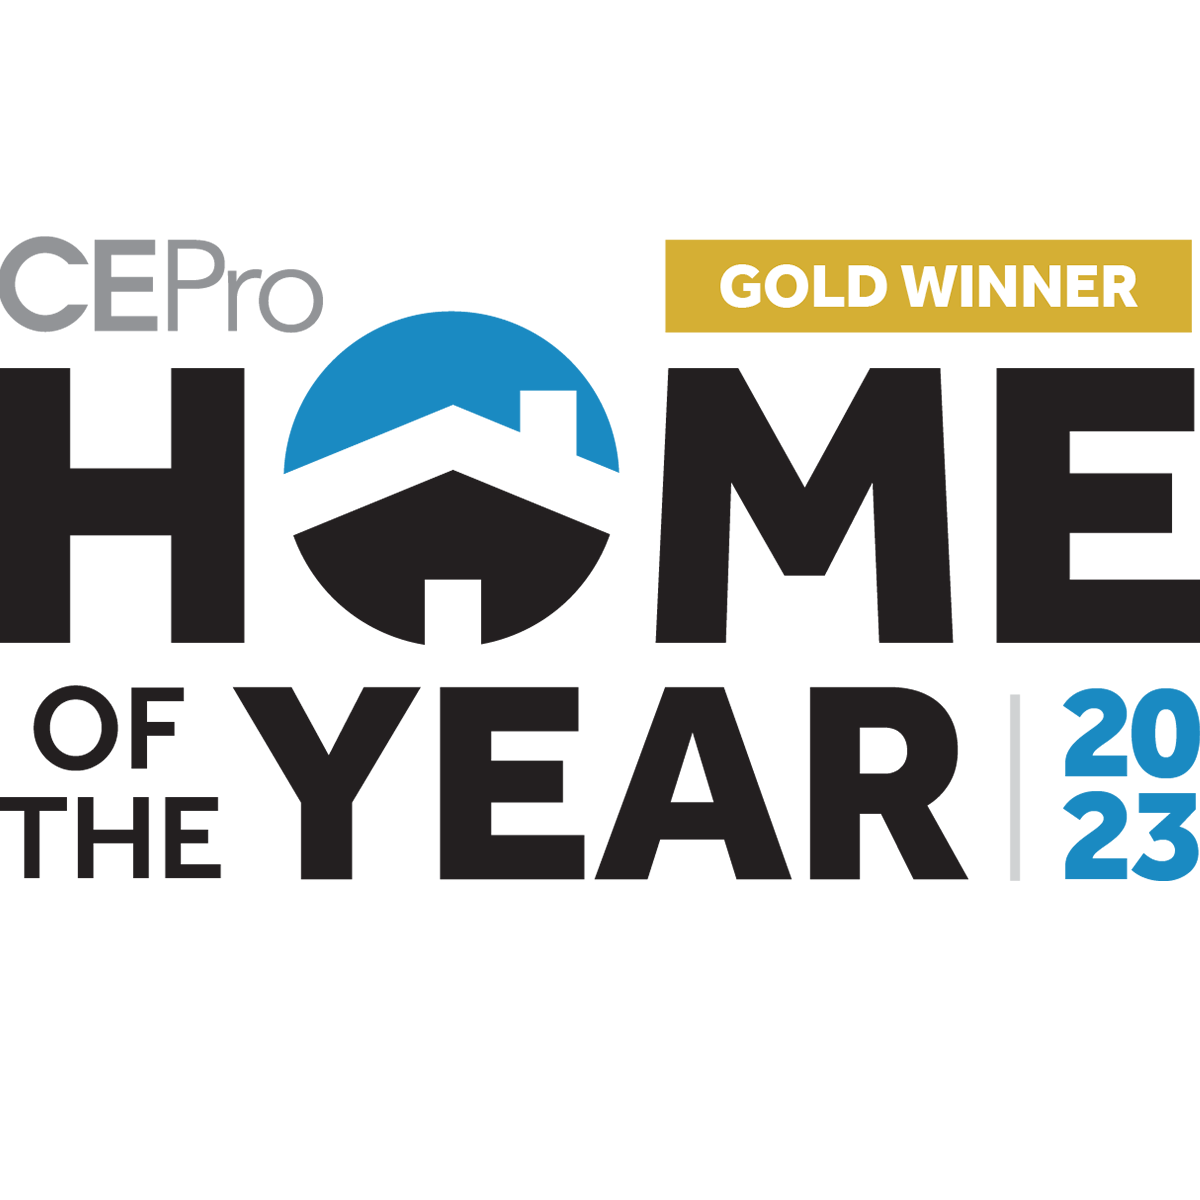 CE Pro Home of the Year